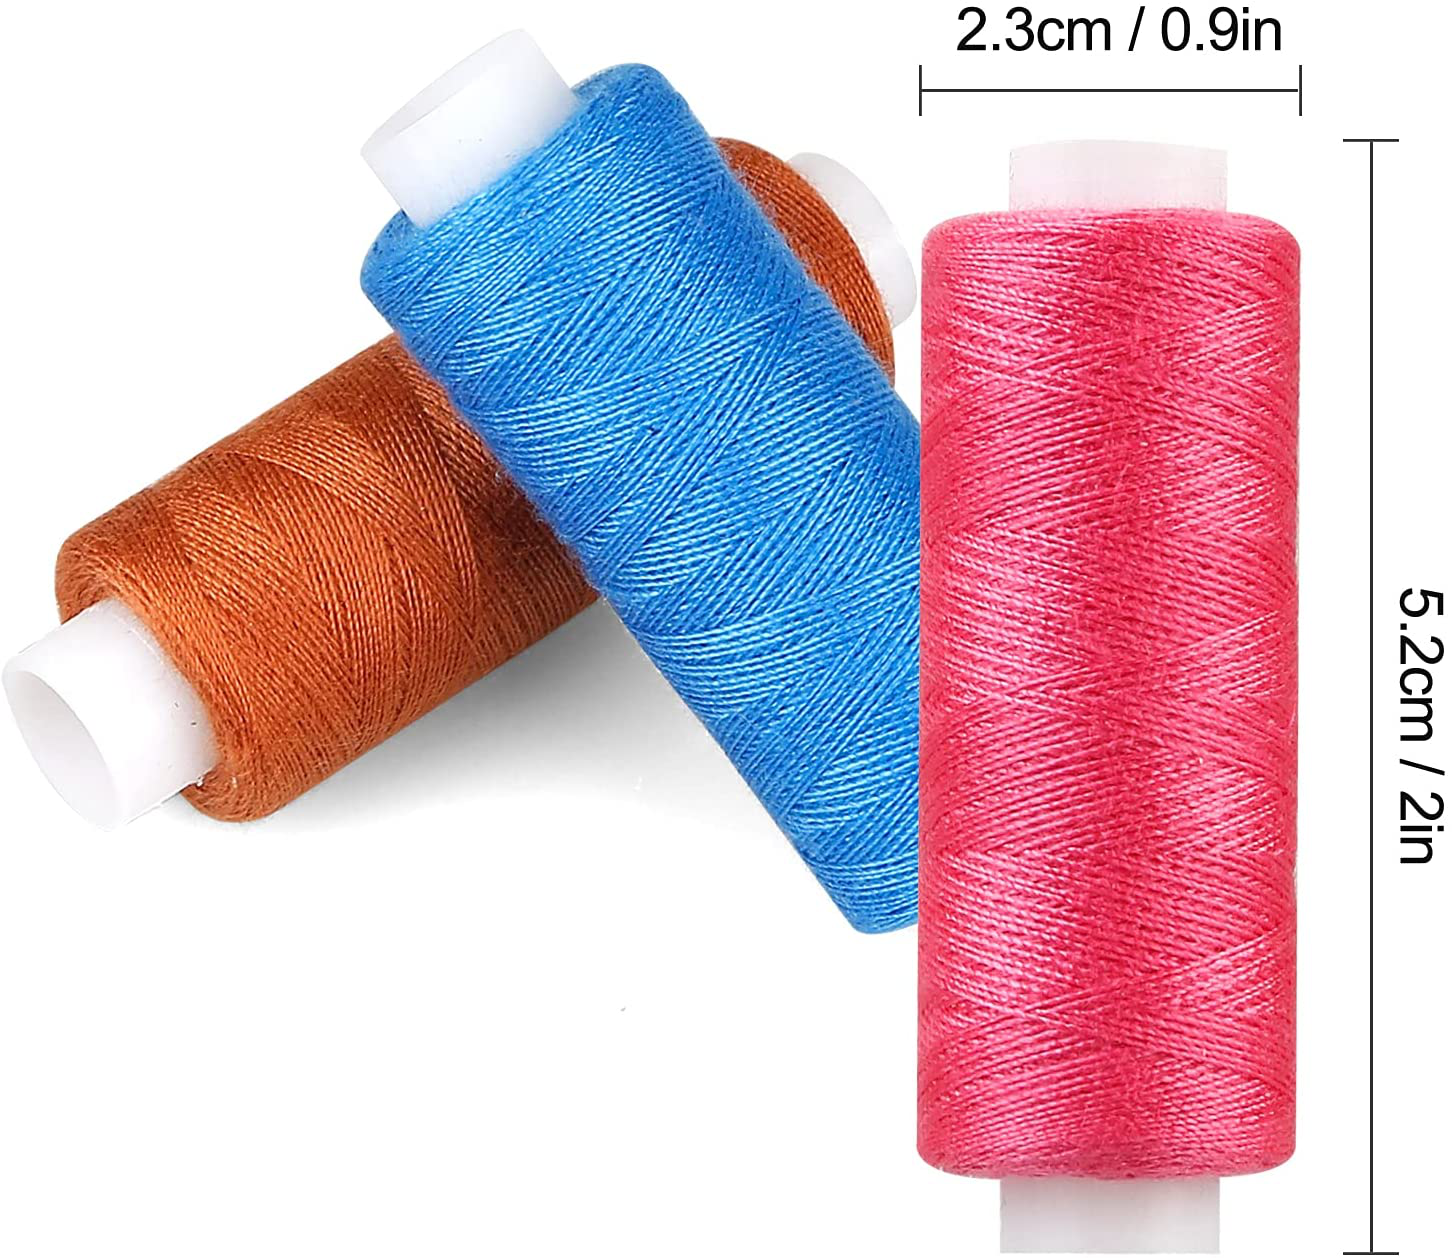 CiaraQ Sewing Threads Kits 250 Yards Per Spools for Hand Sewing & Embroidery